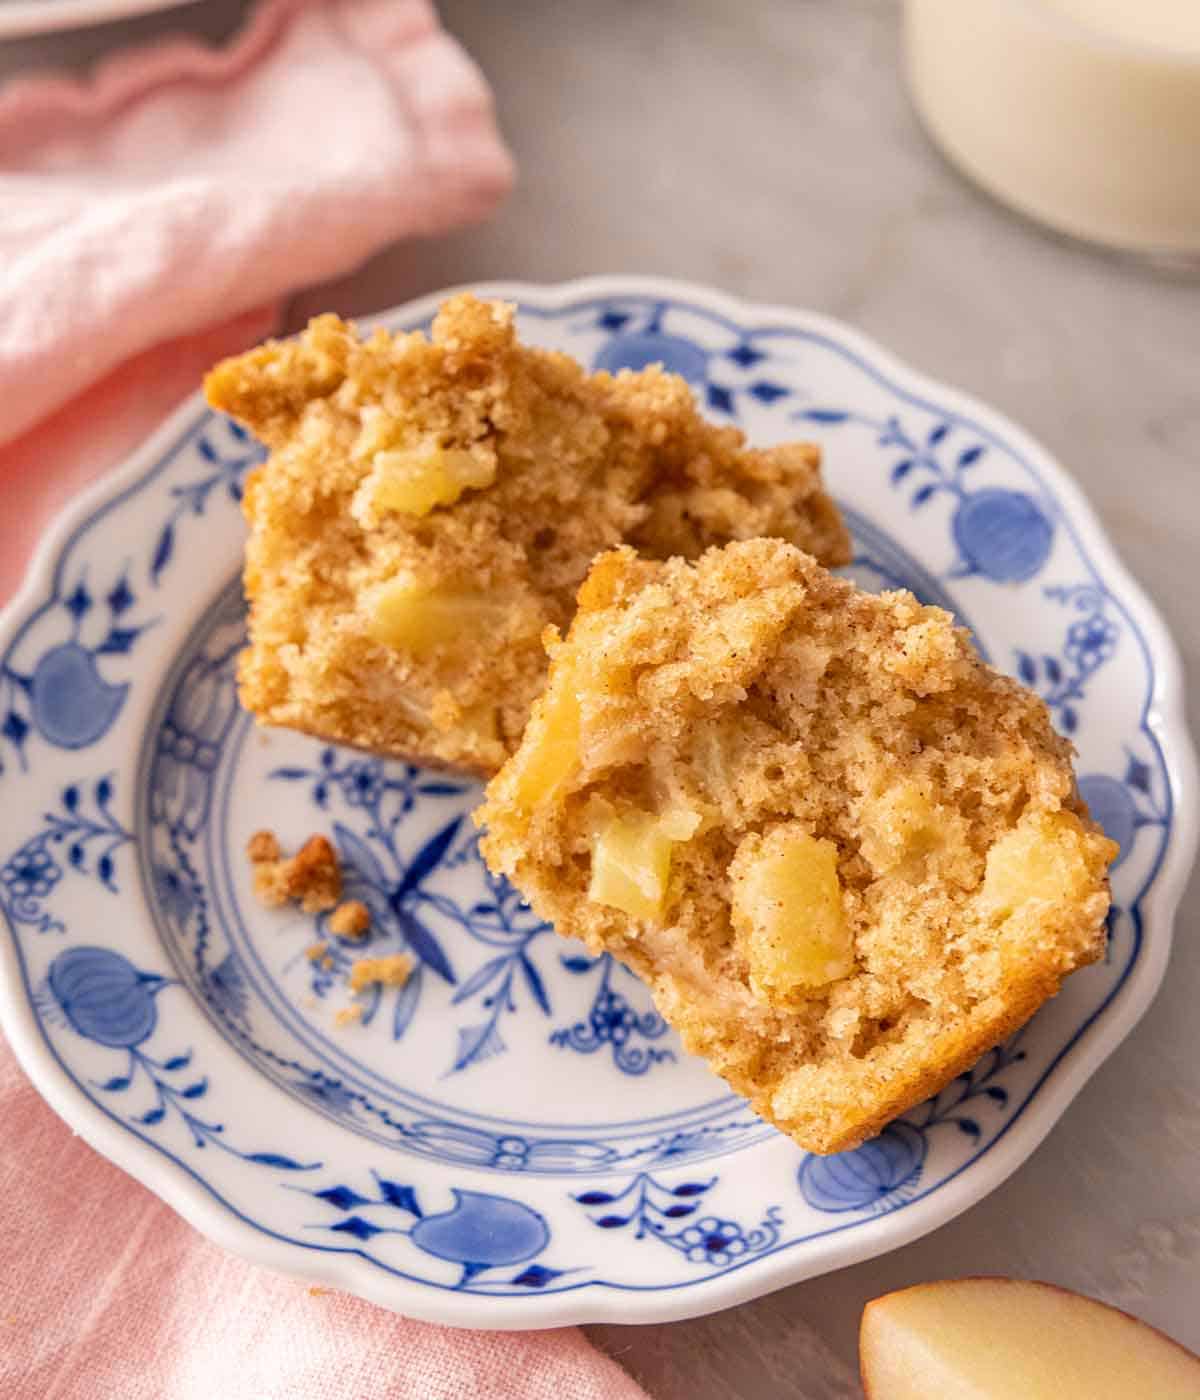 A plate with an apple muffin cut in half, showing the chunks of apples inside the crumb.